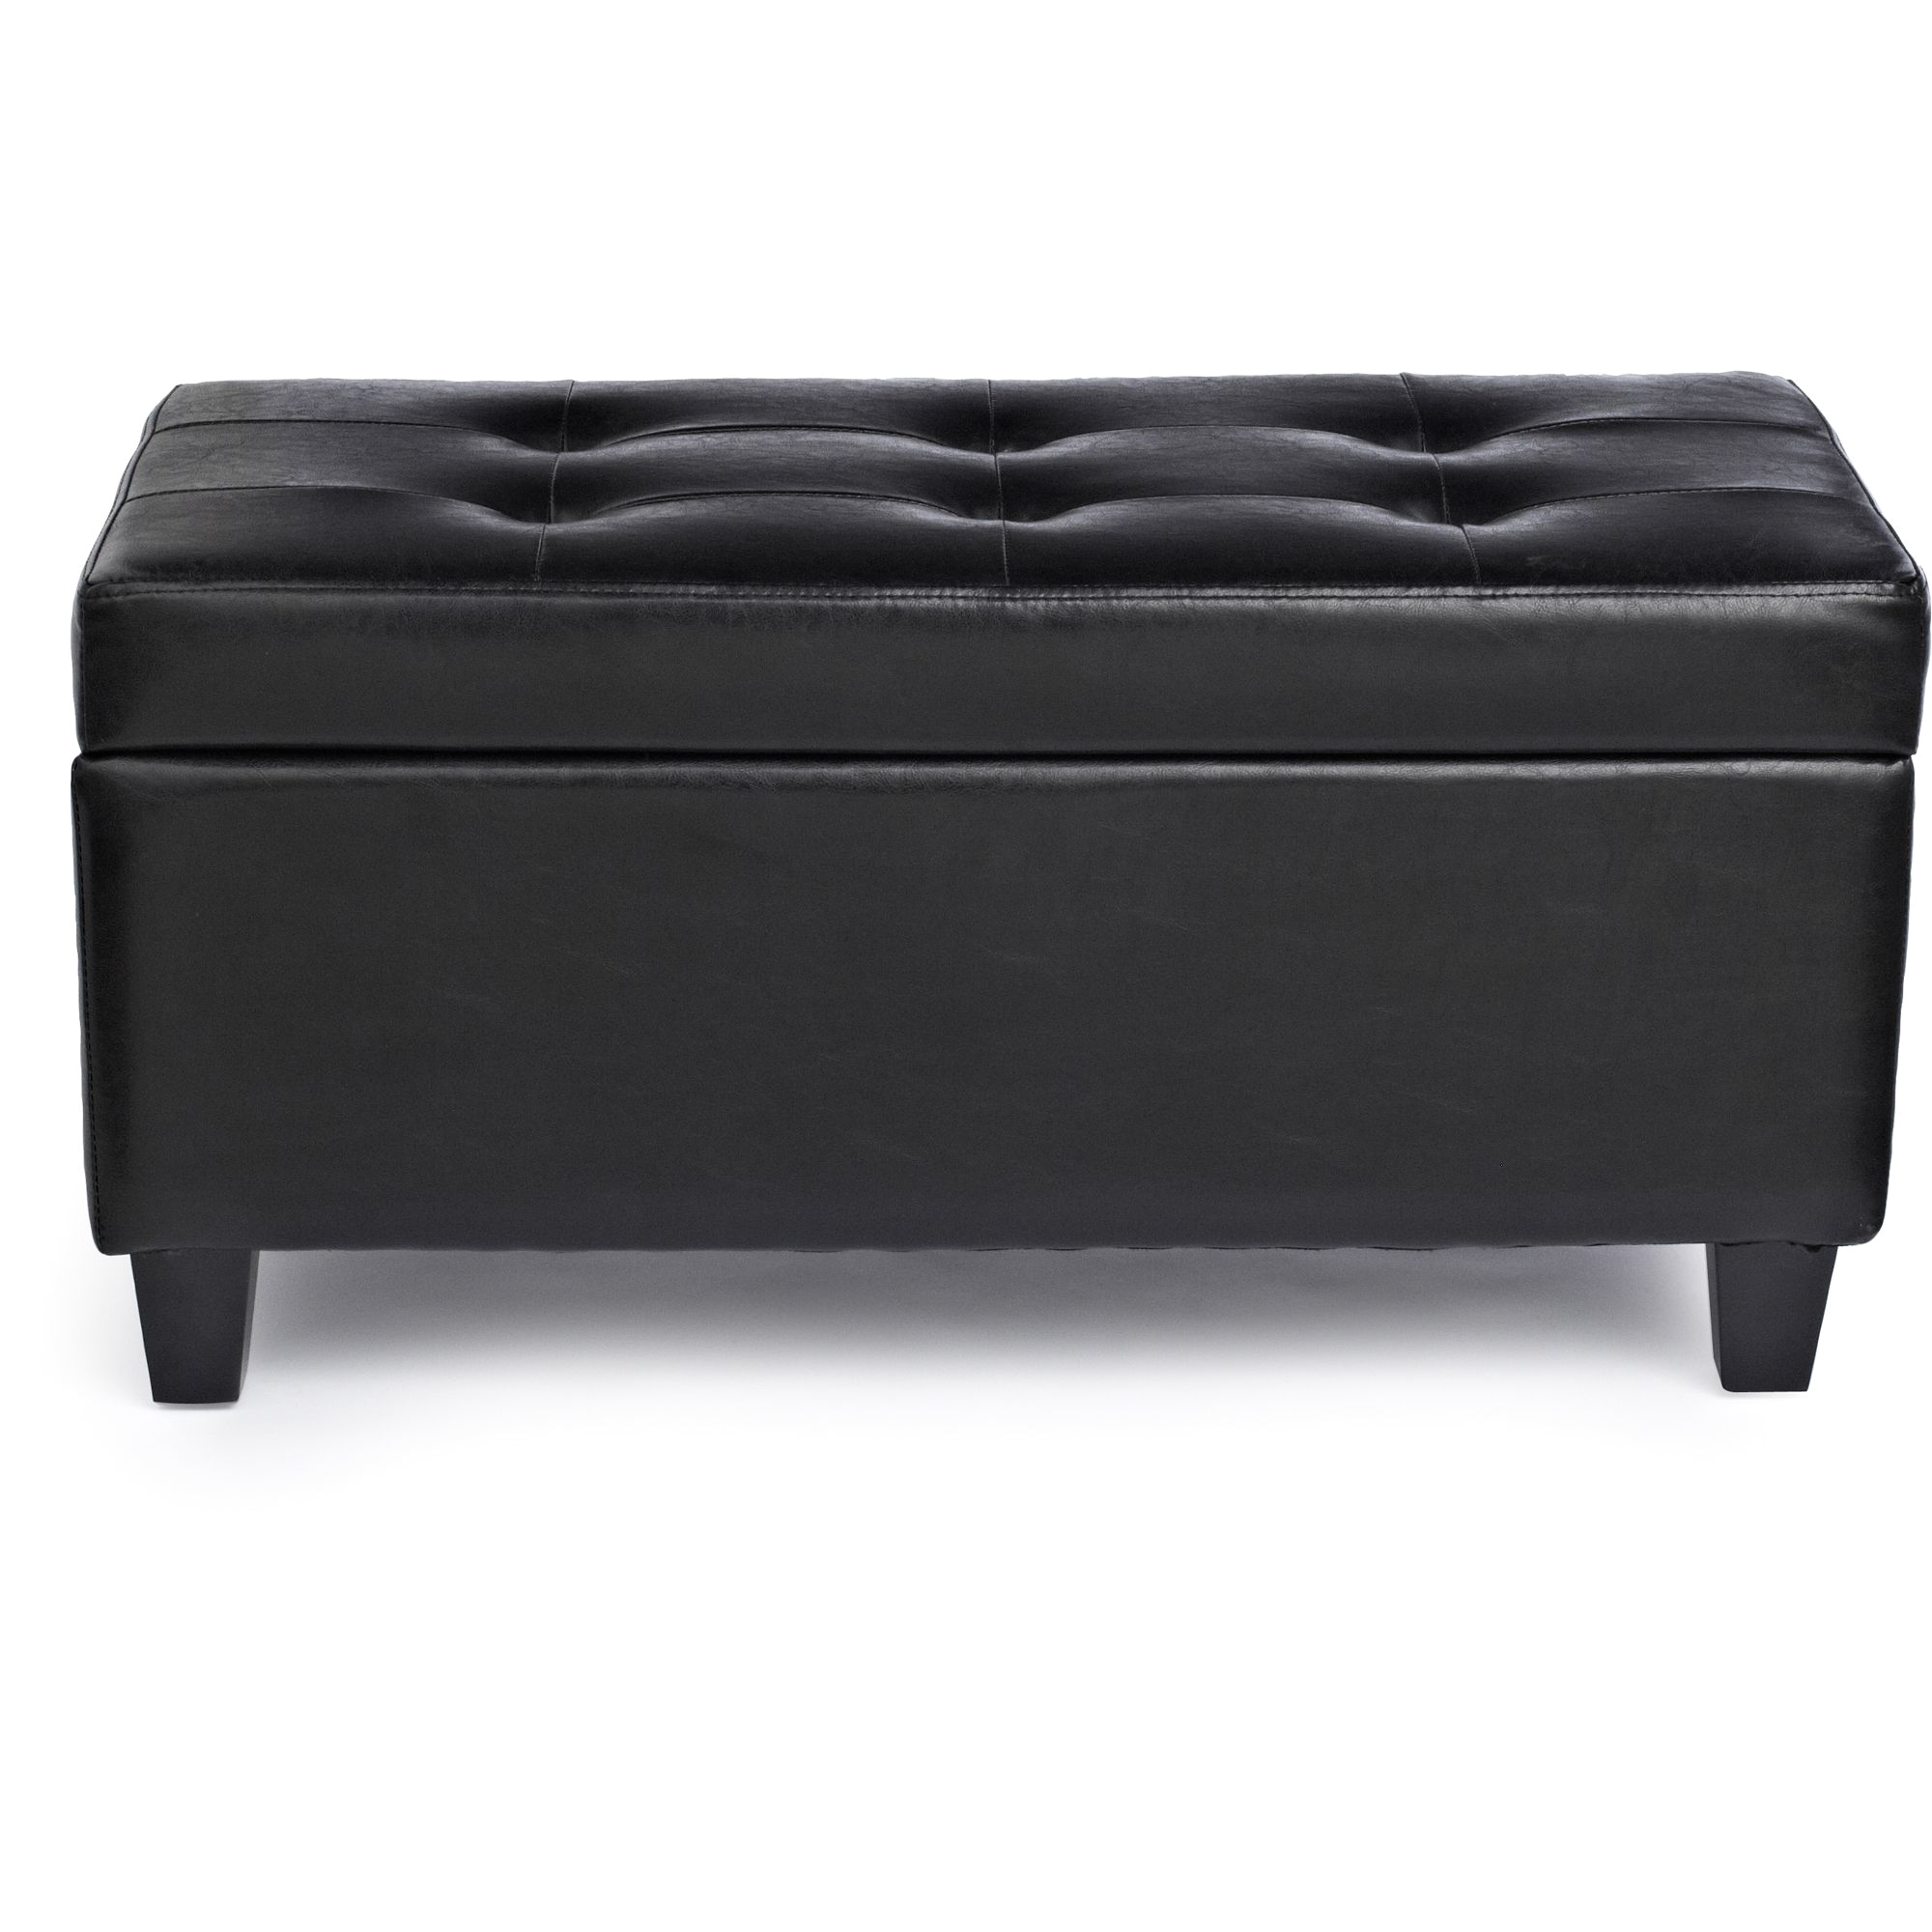 HomeTrends Storage Bench Ottoman Black 98$ For my bedroom